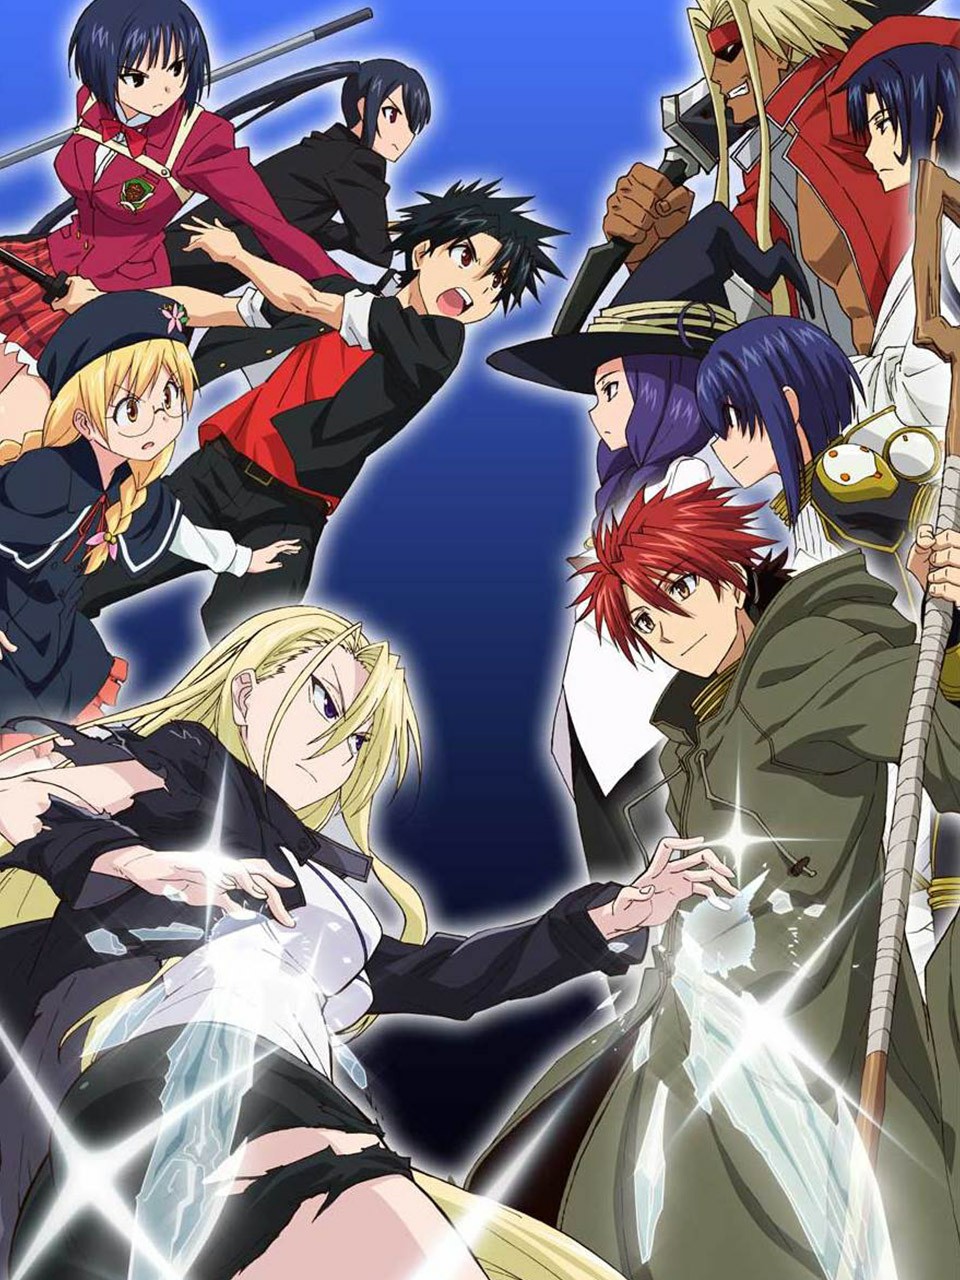 UQ Holder Anime Licensed But it will probably cost you more money   AstroNerdBoys Anime  Manga Blog  AstroNerdBoys Anime  Manga Blog